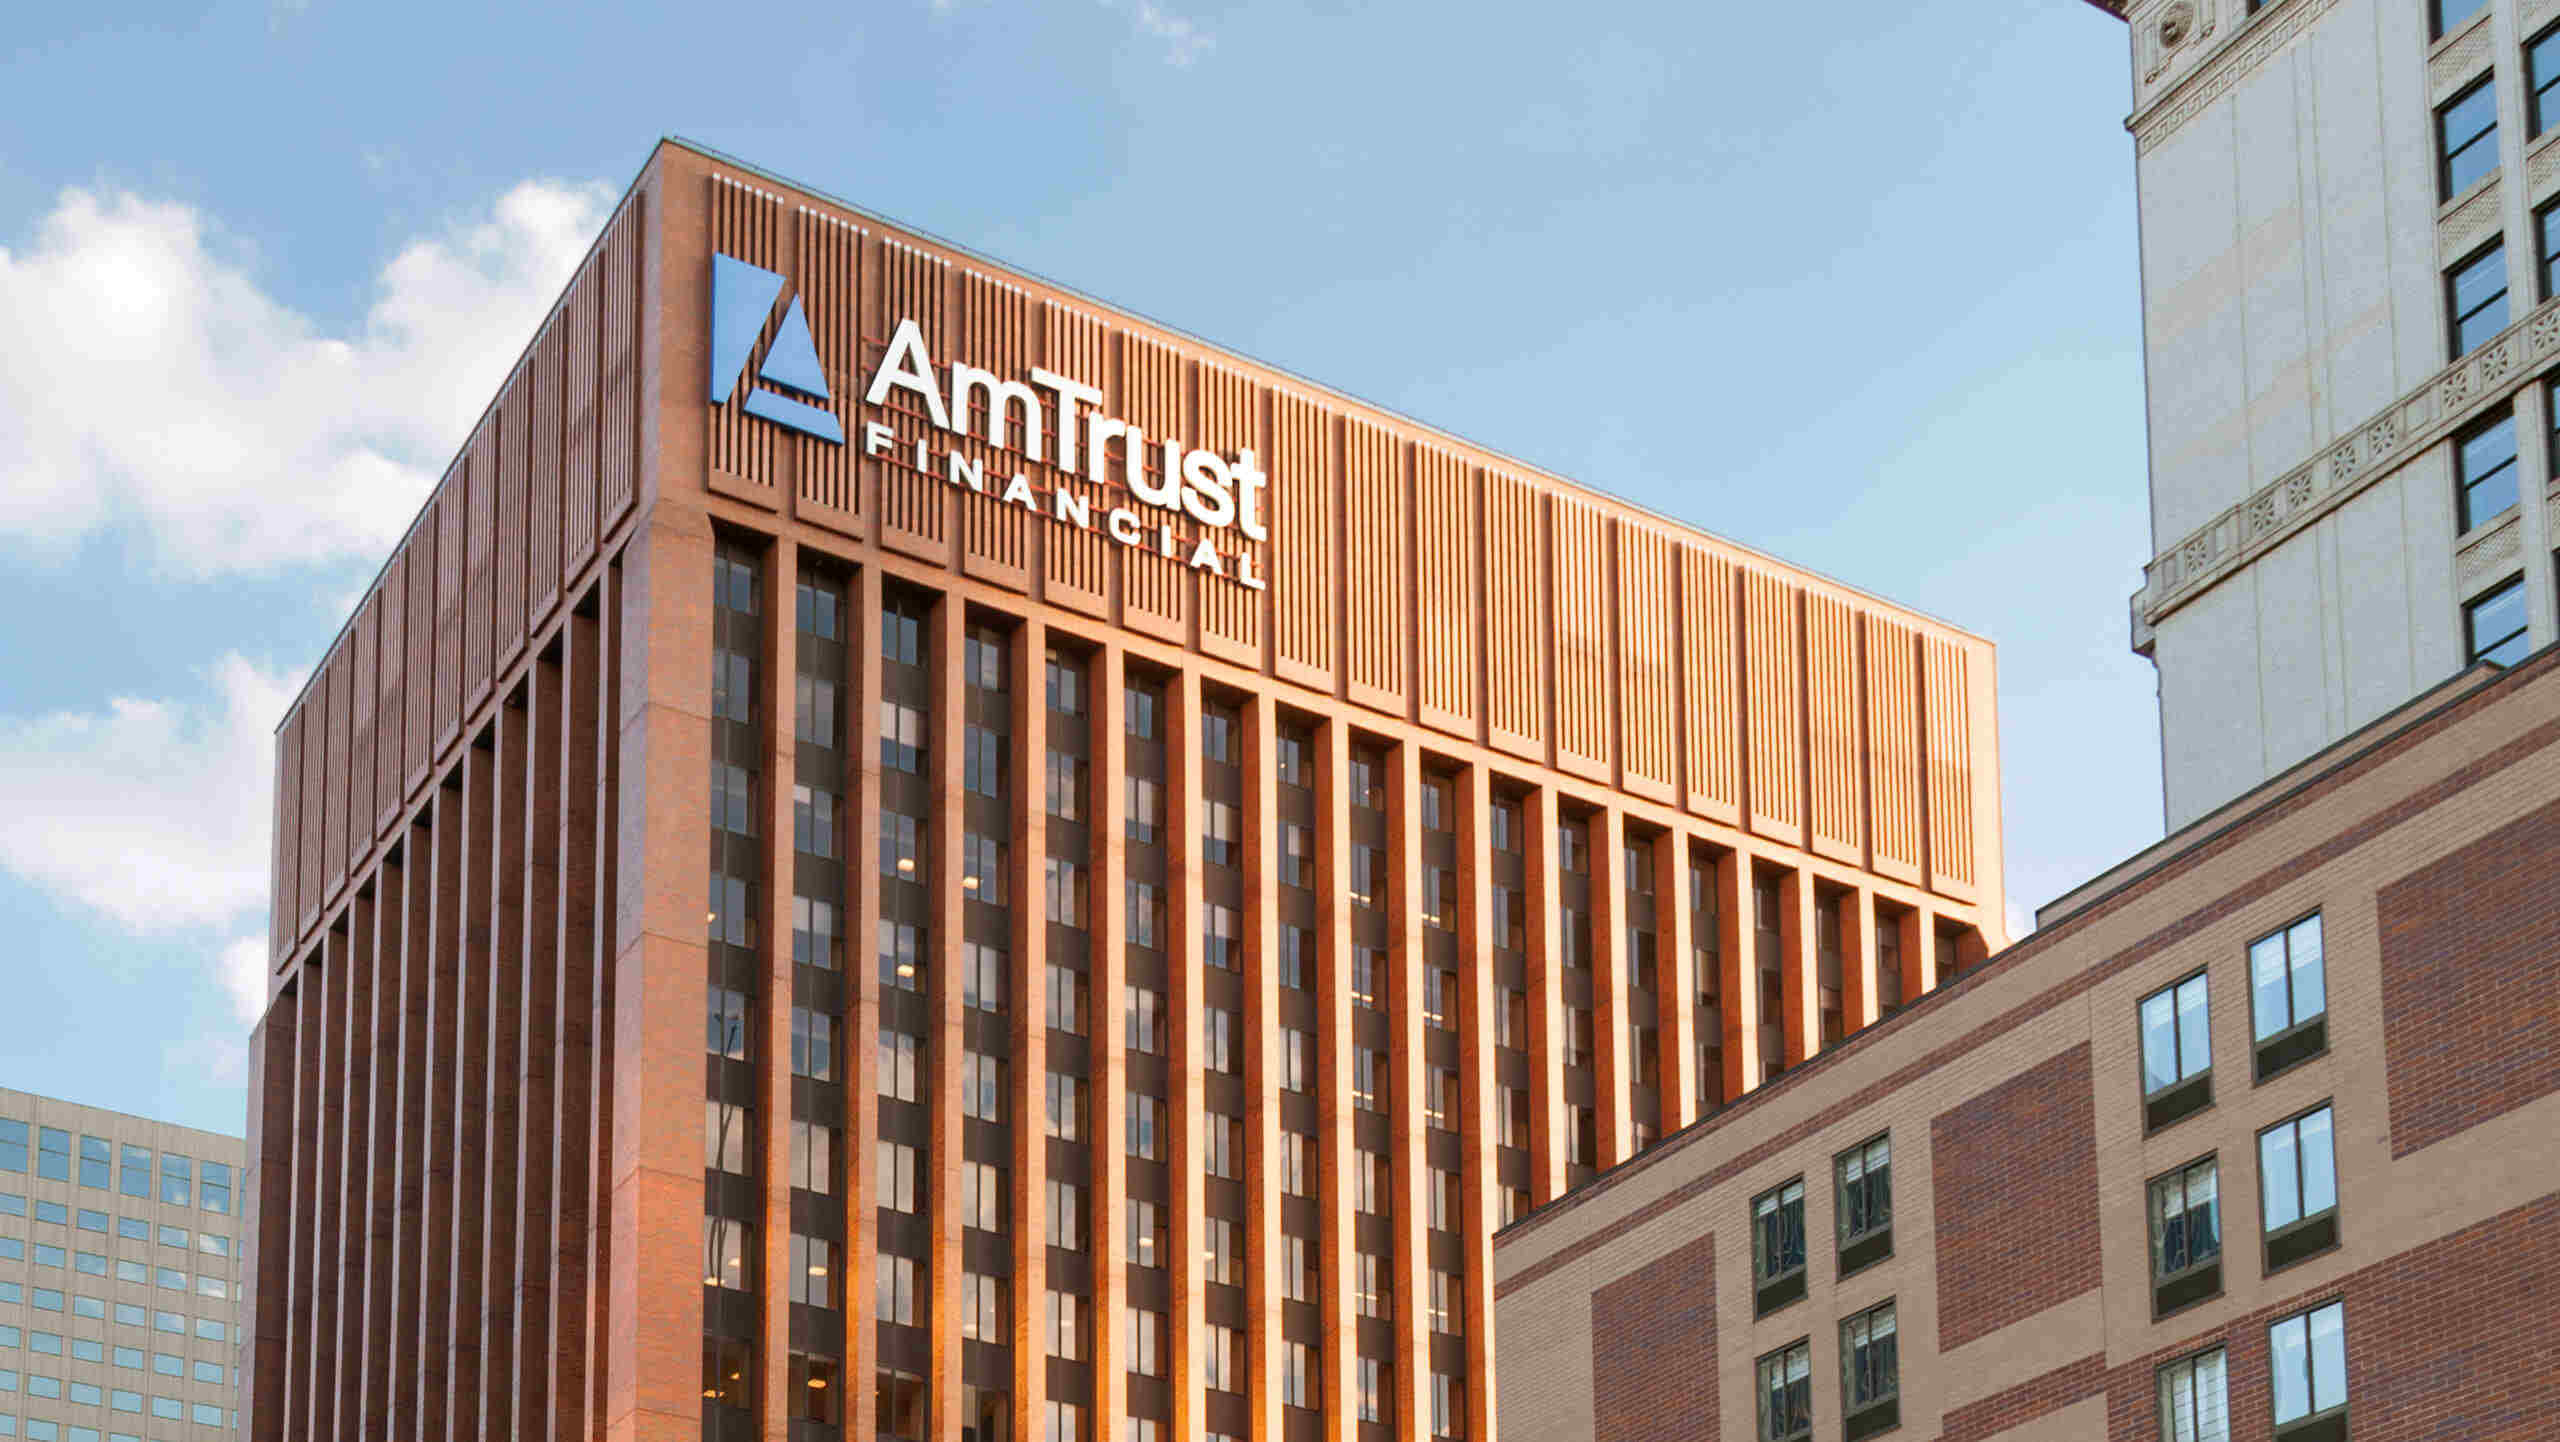 Amtrust North America Insurance Carriers Amtrust Financial